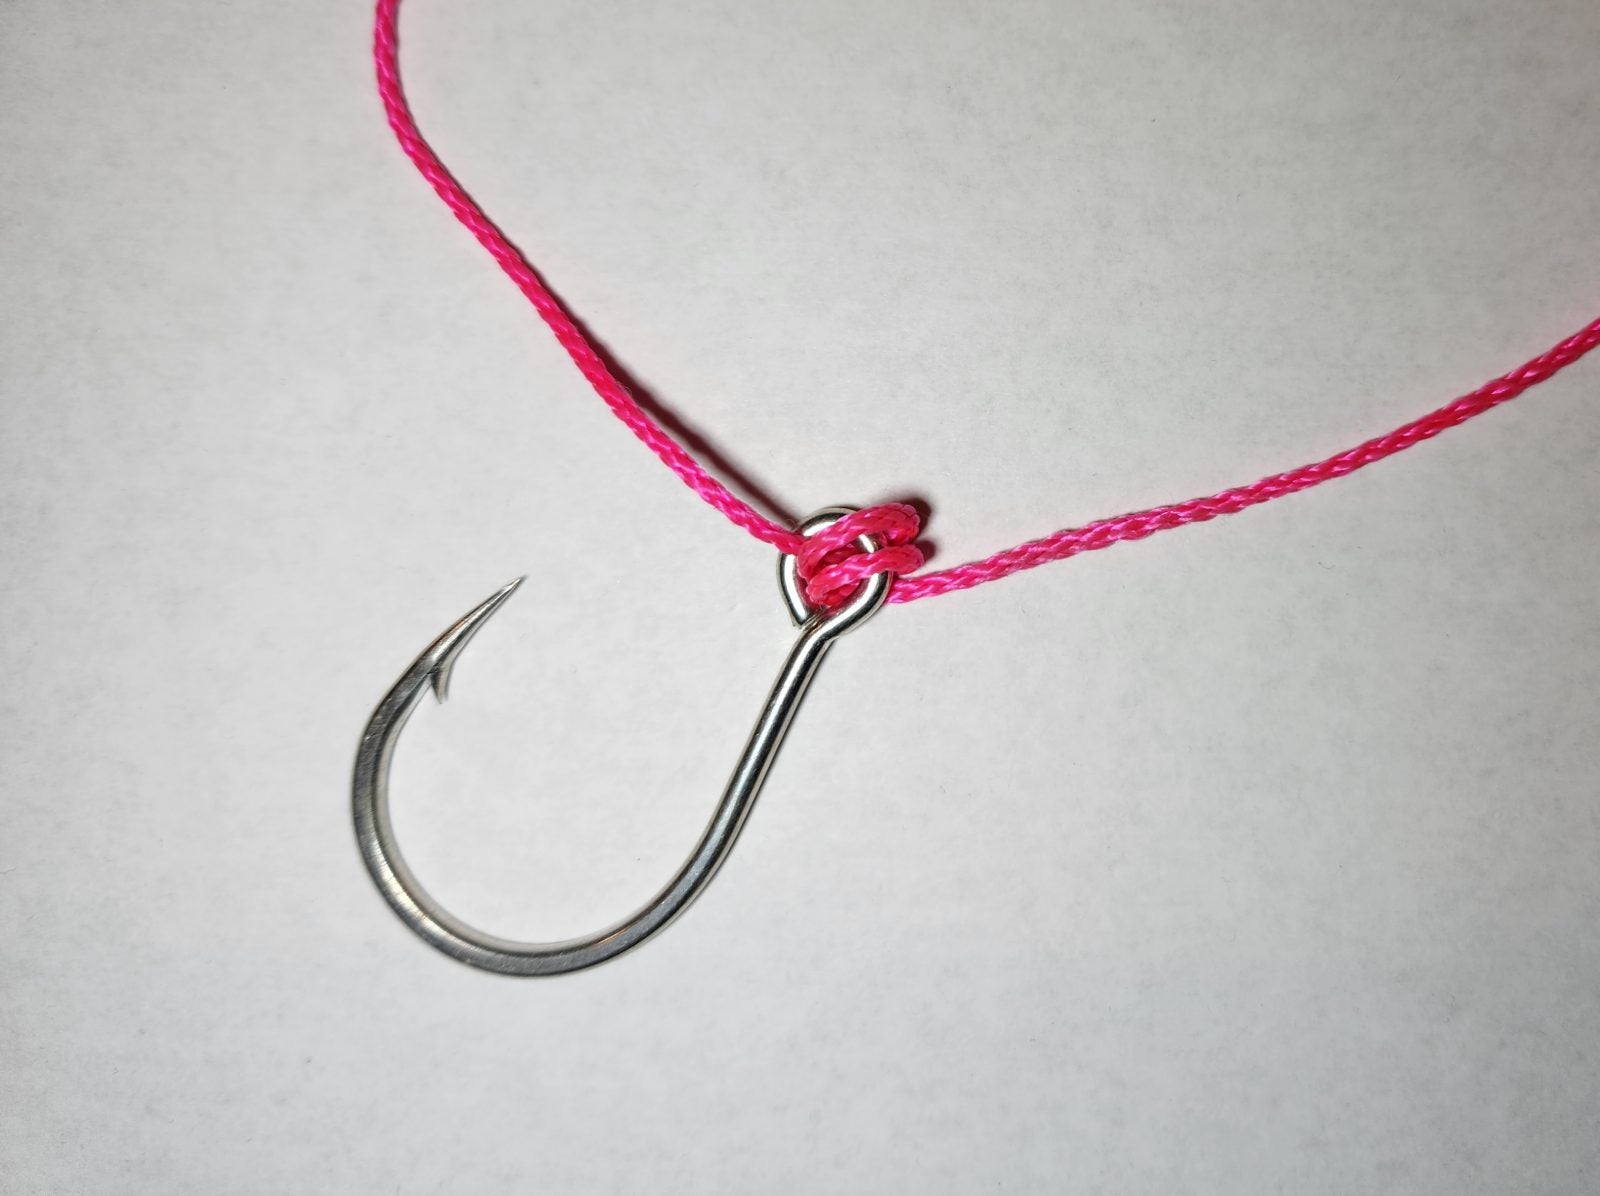 Are You Nuts? Know your Fishing Knots! – TN Knot